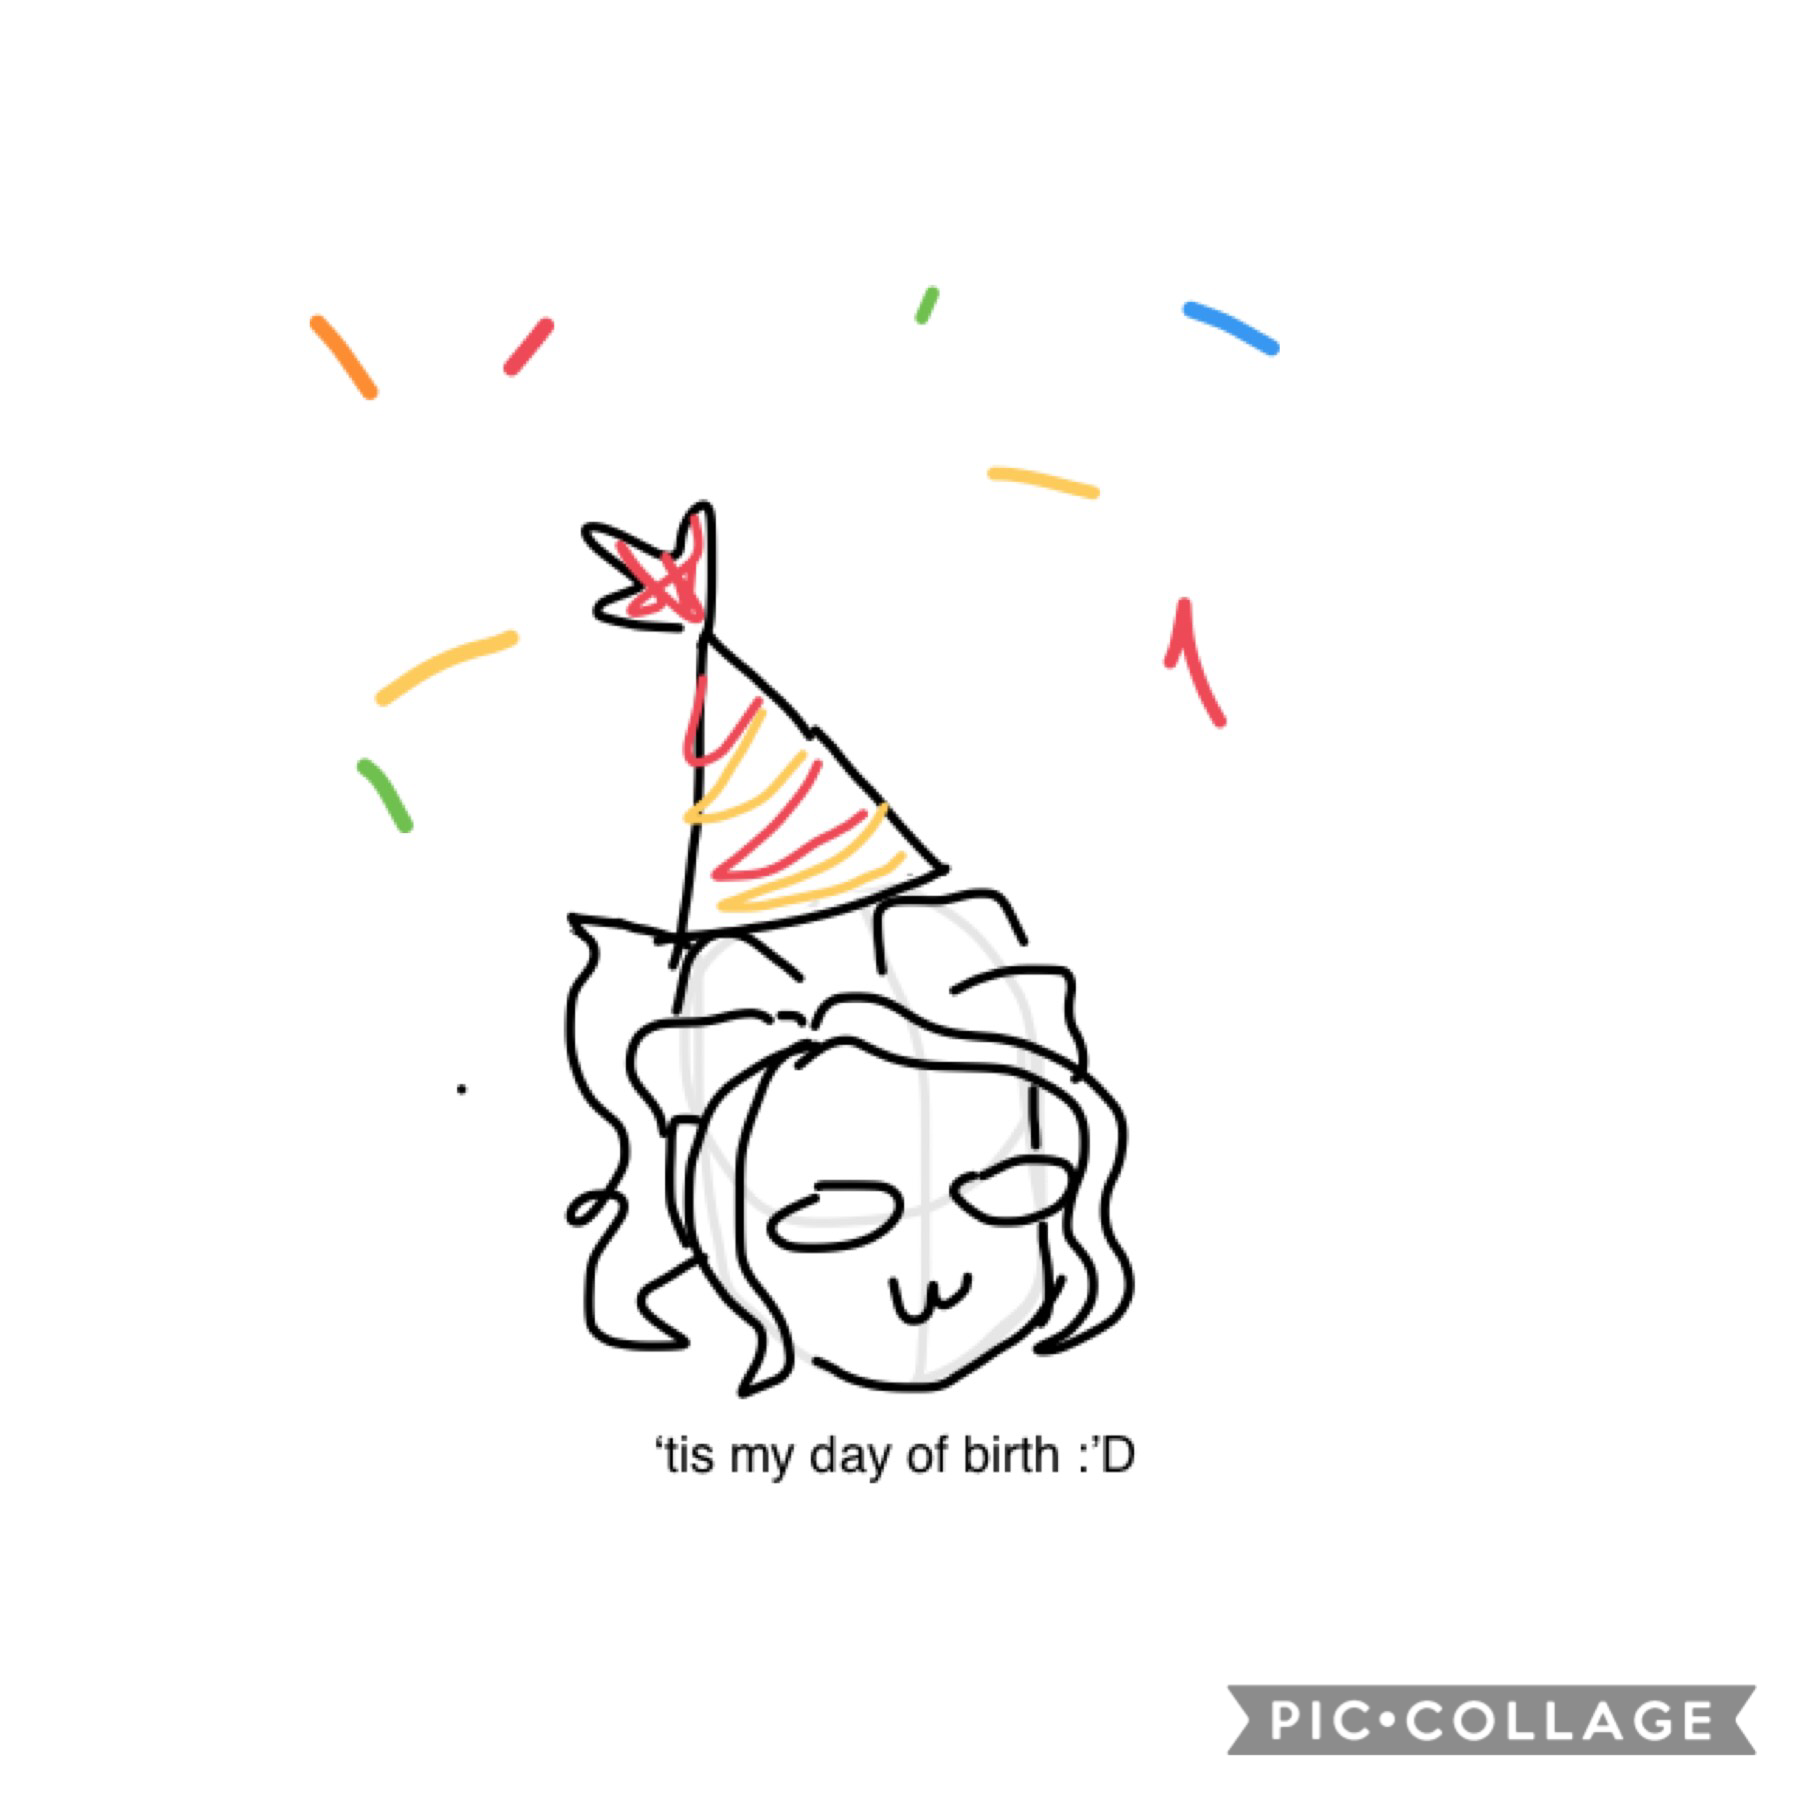 I’m 15 now oof